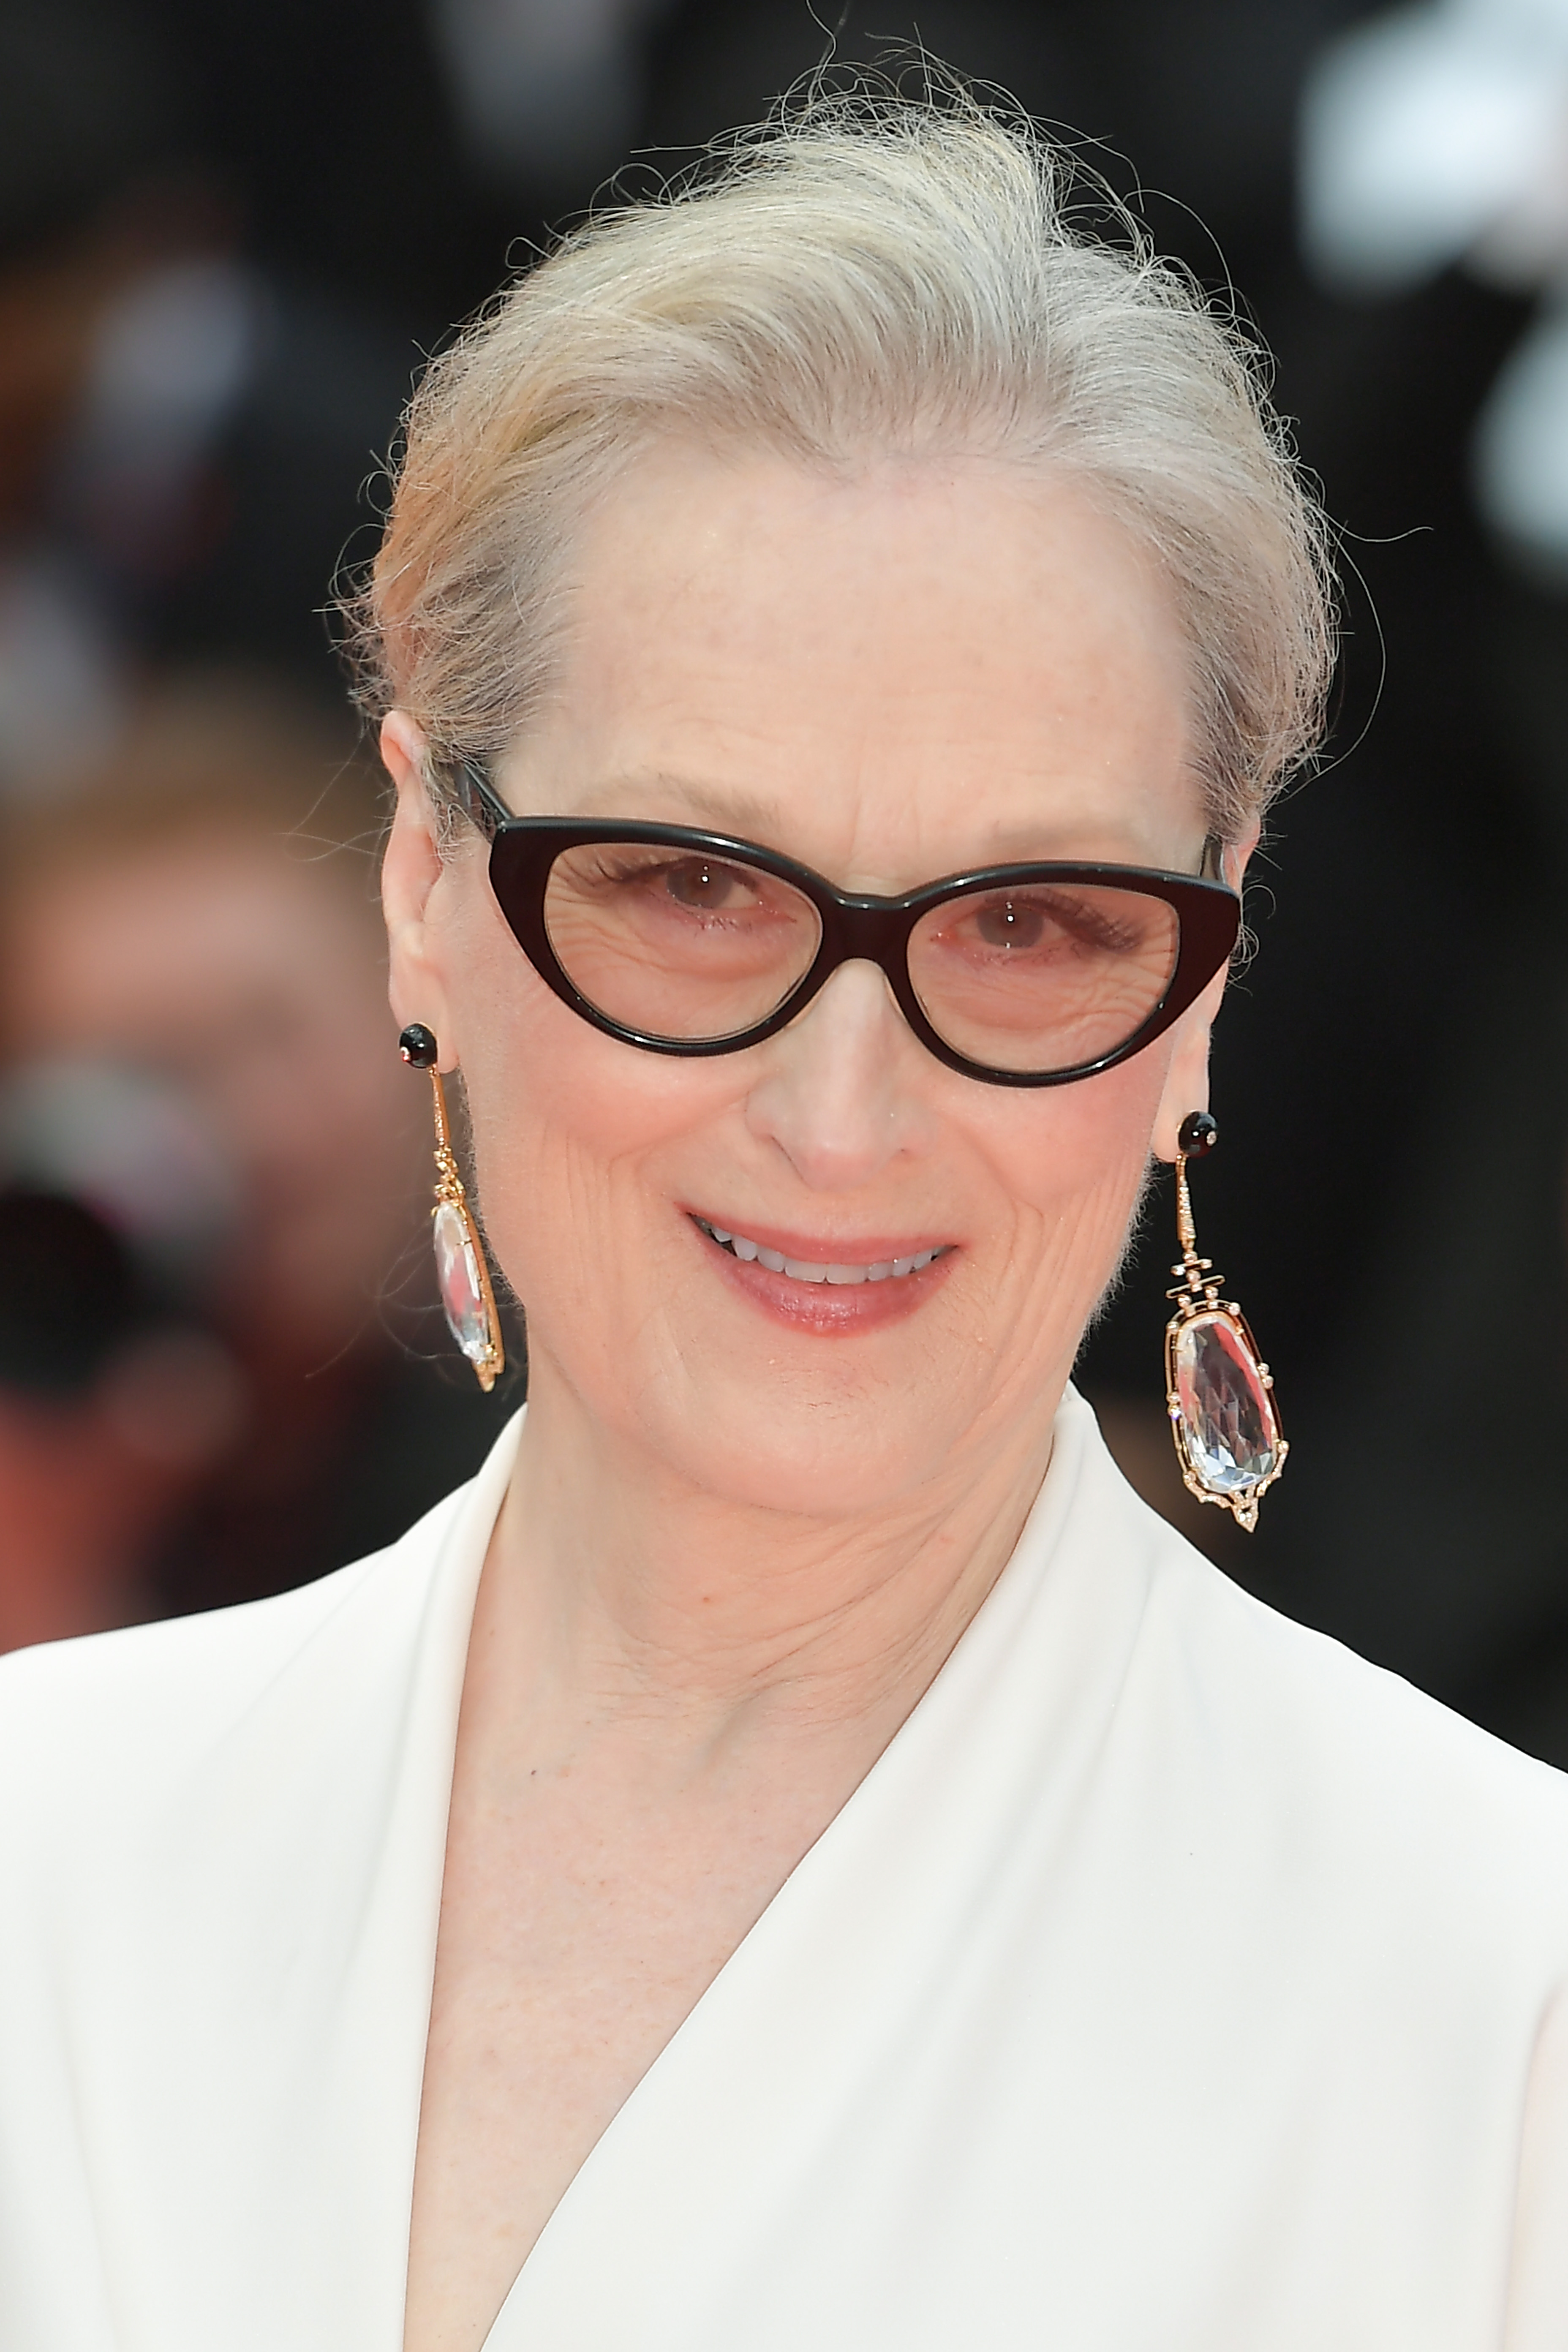 Meryl Streep attends "Le Deuxième Acte" Screening & opening ceremony red carpet at the 77th annual Cannes Film Festival in Cannes, France, on May 14, 2024. | Source: Getty Images